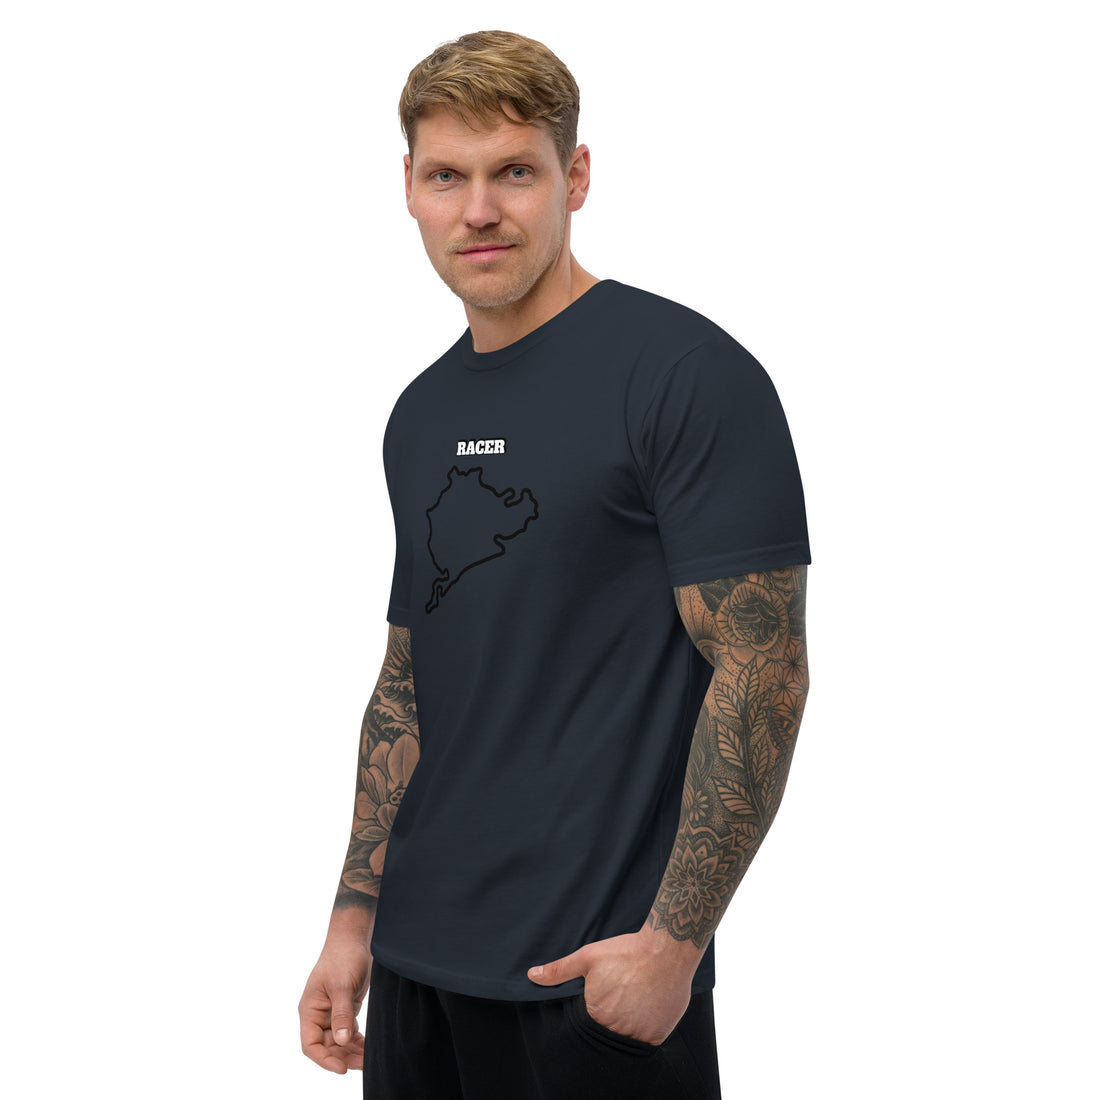 BOOSTANE Racer Short Sleeve Fitted Tee